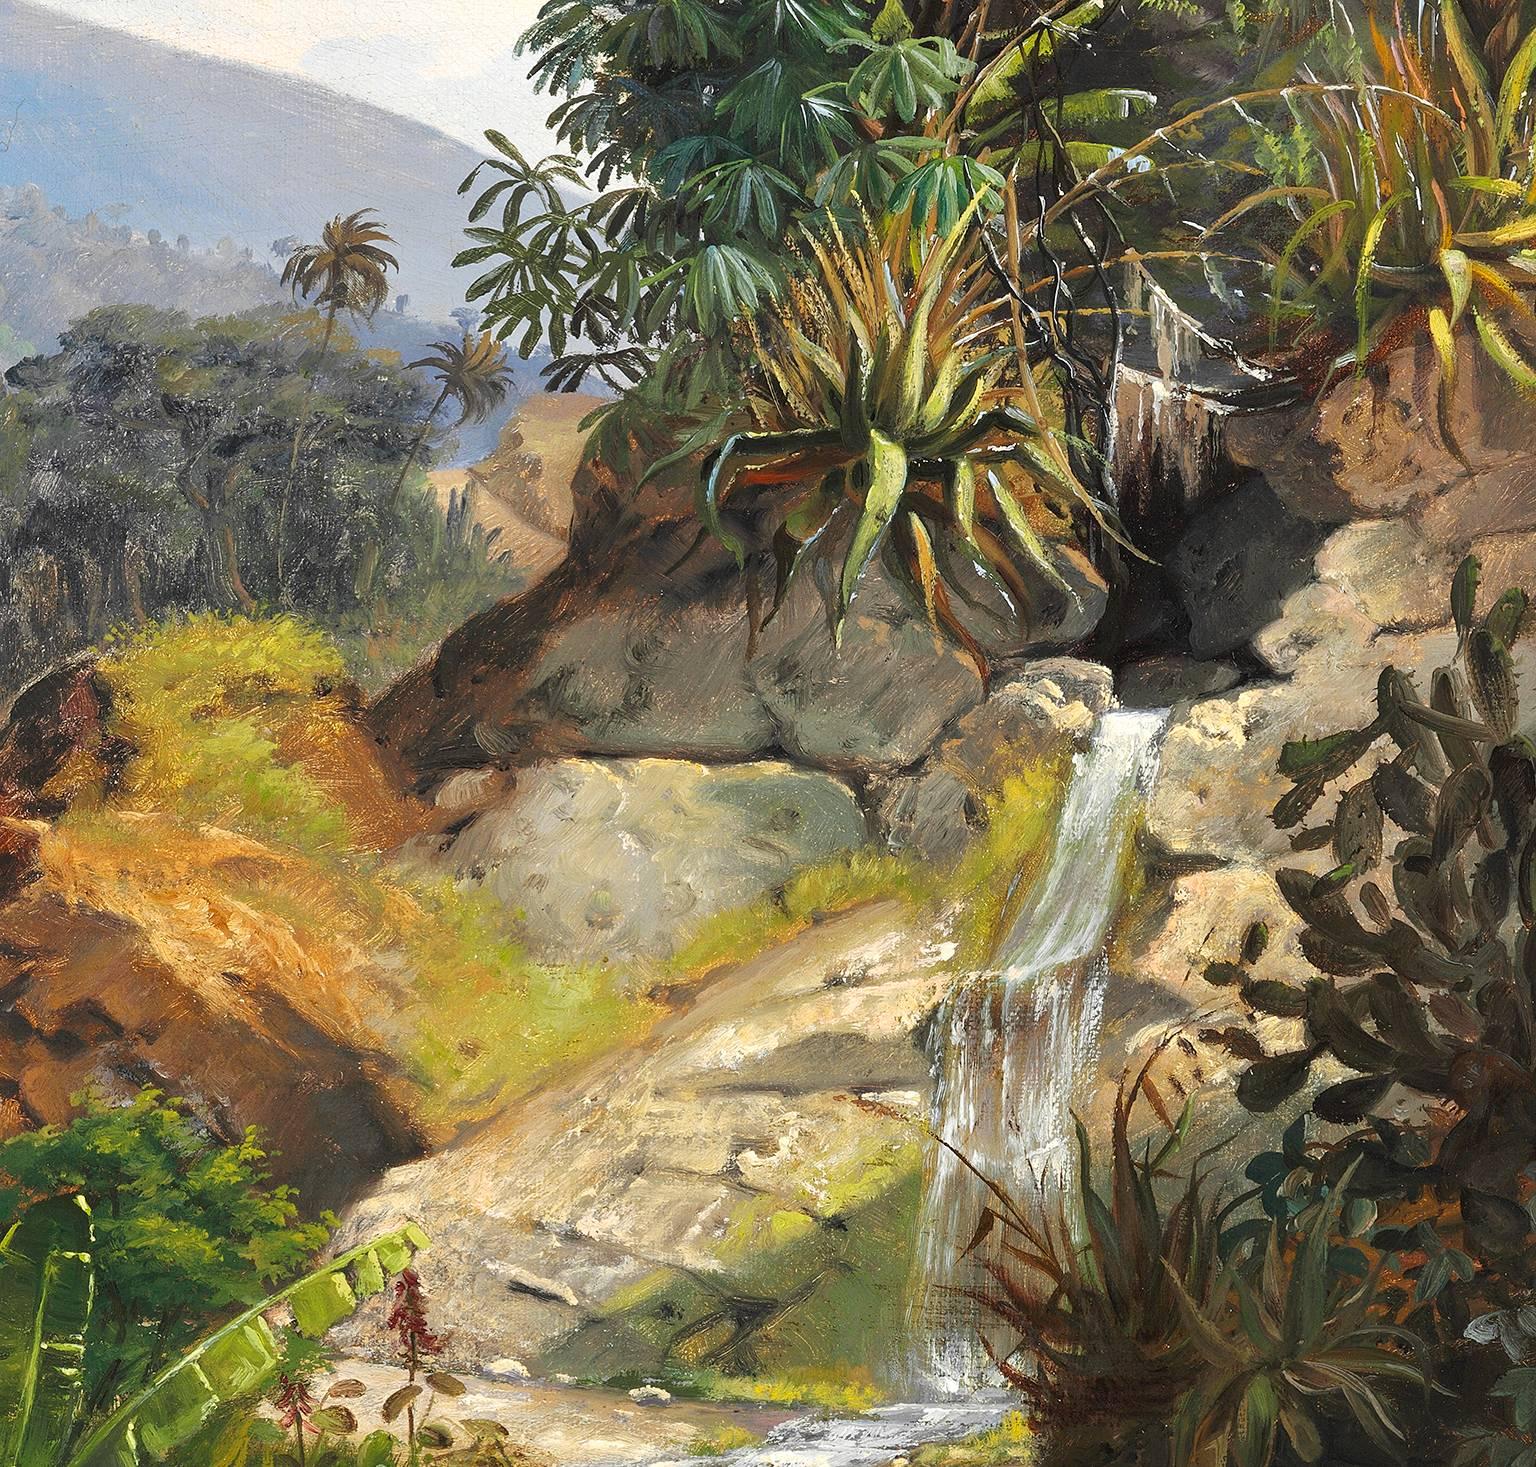 Scenery from the mountains and hills on St. Croix, The Virgin Islands - Painting by Frederik Visby